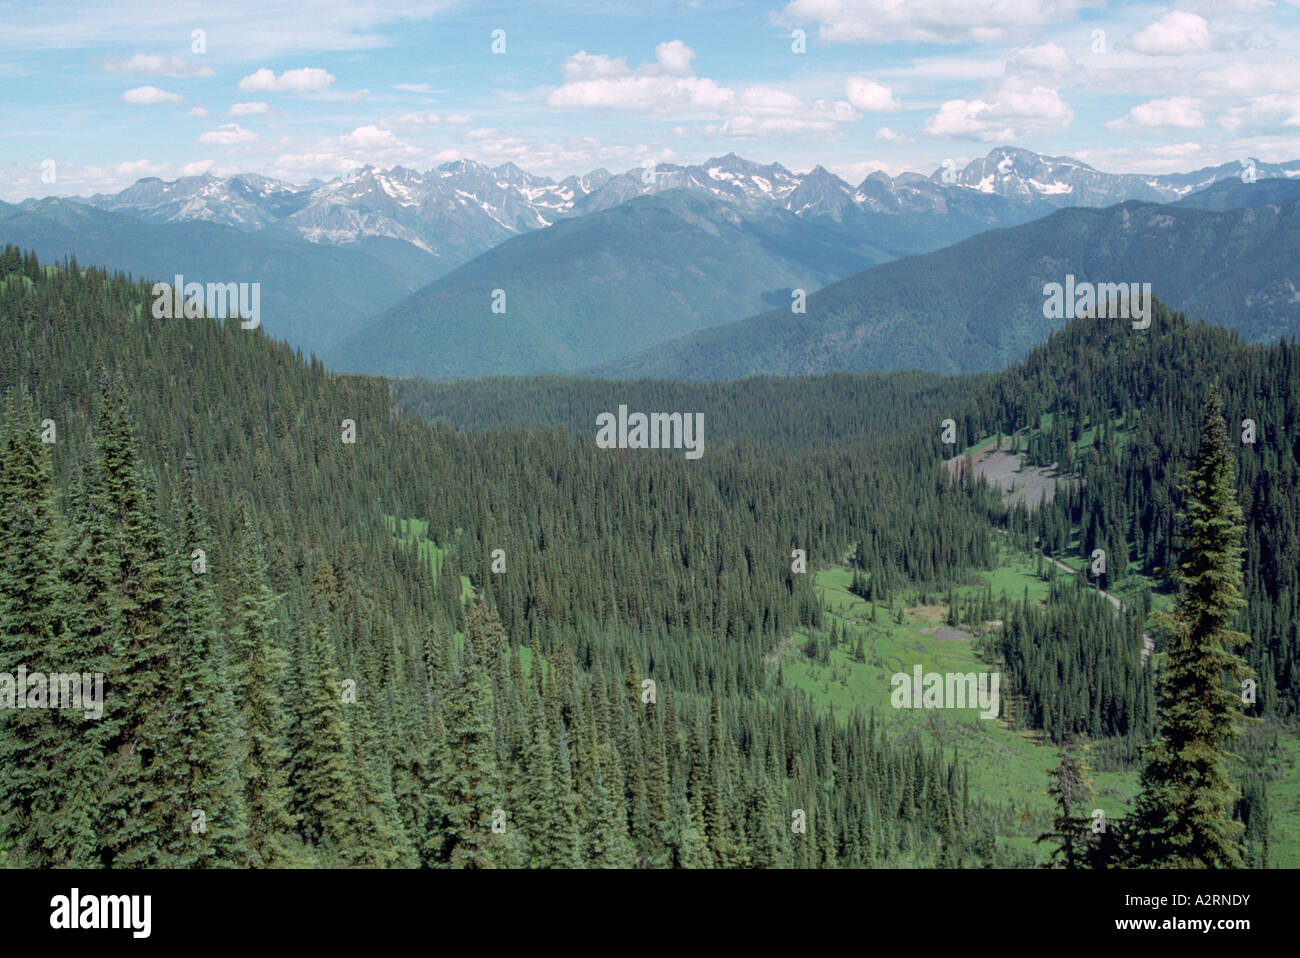 View of the Selkirk Mountains and Coniferous Forests from Idaho Peak in the Kootenay Region of British Columbia Canada Stock Photo